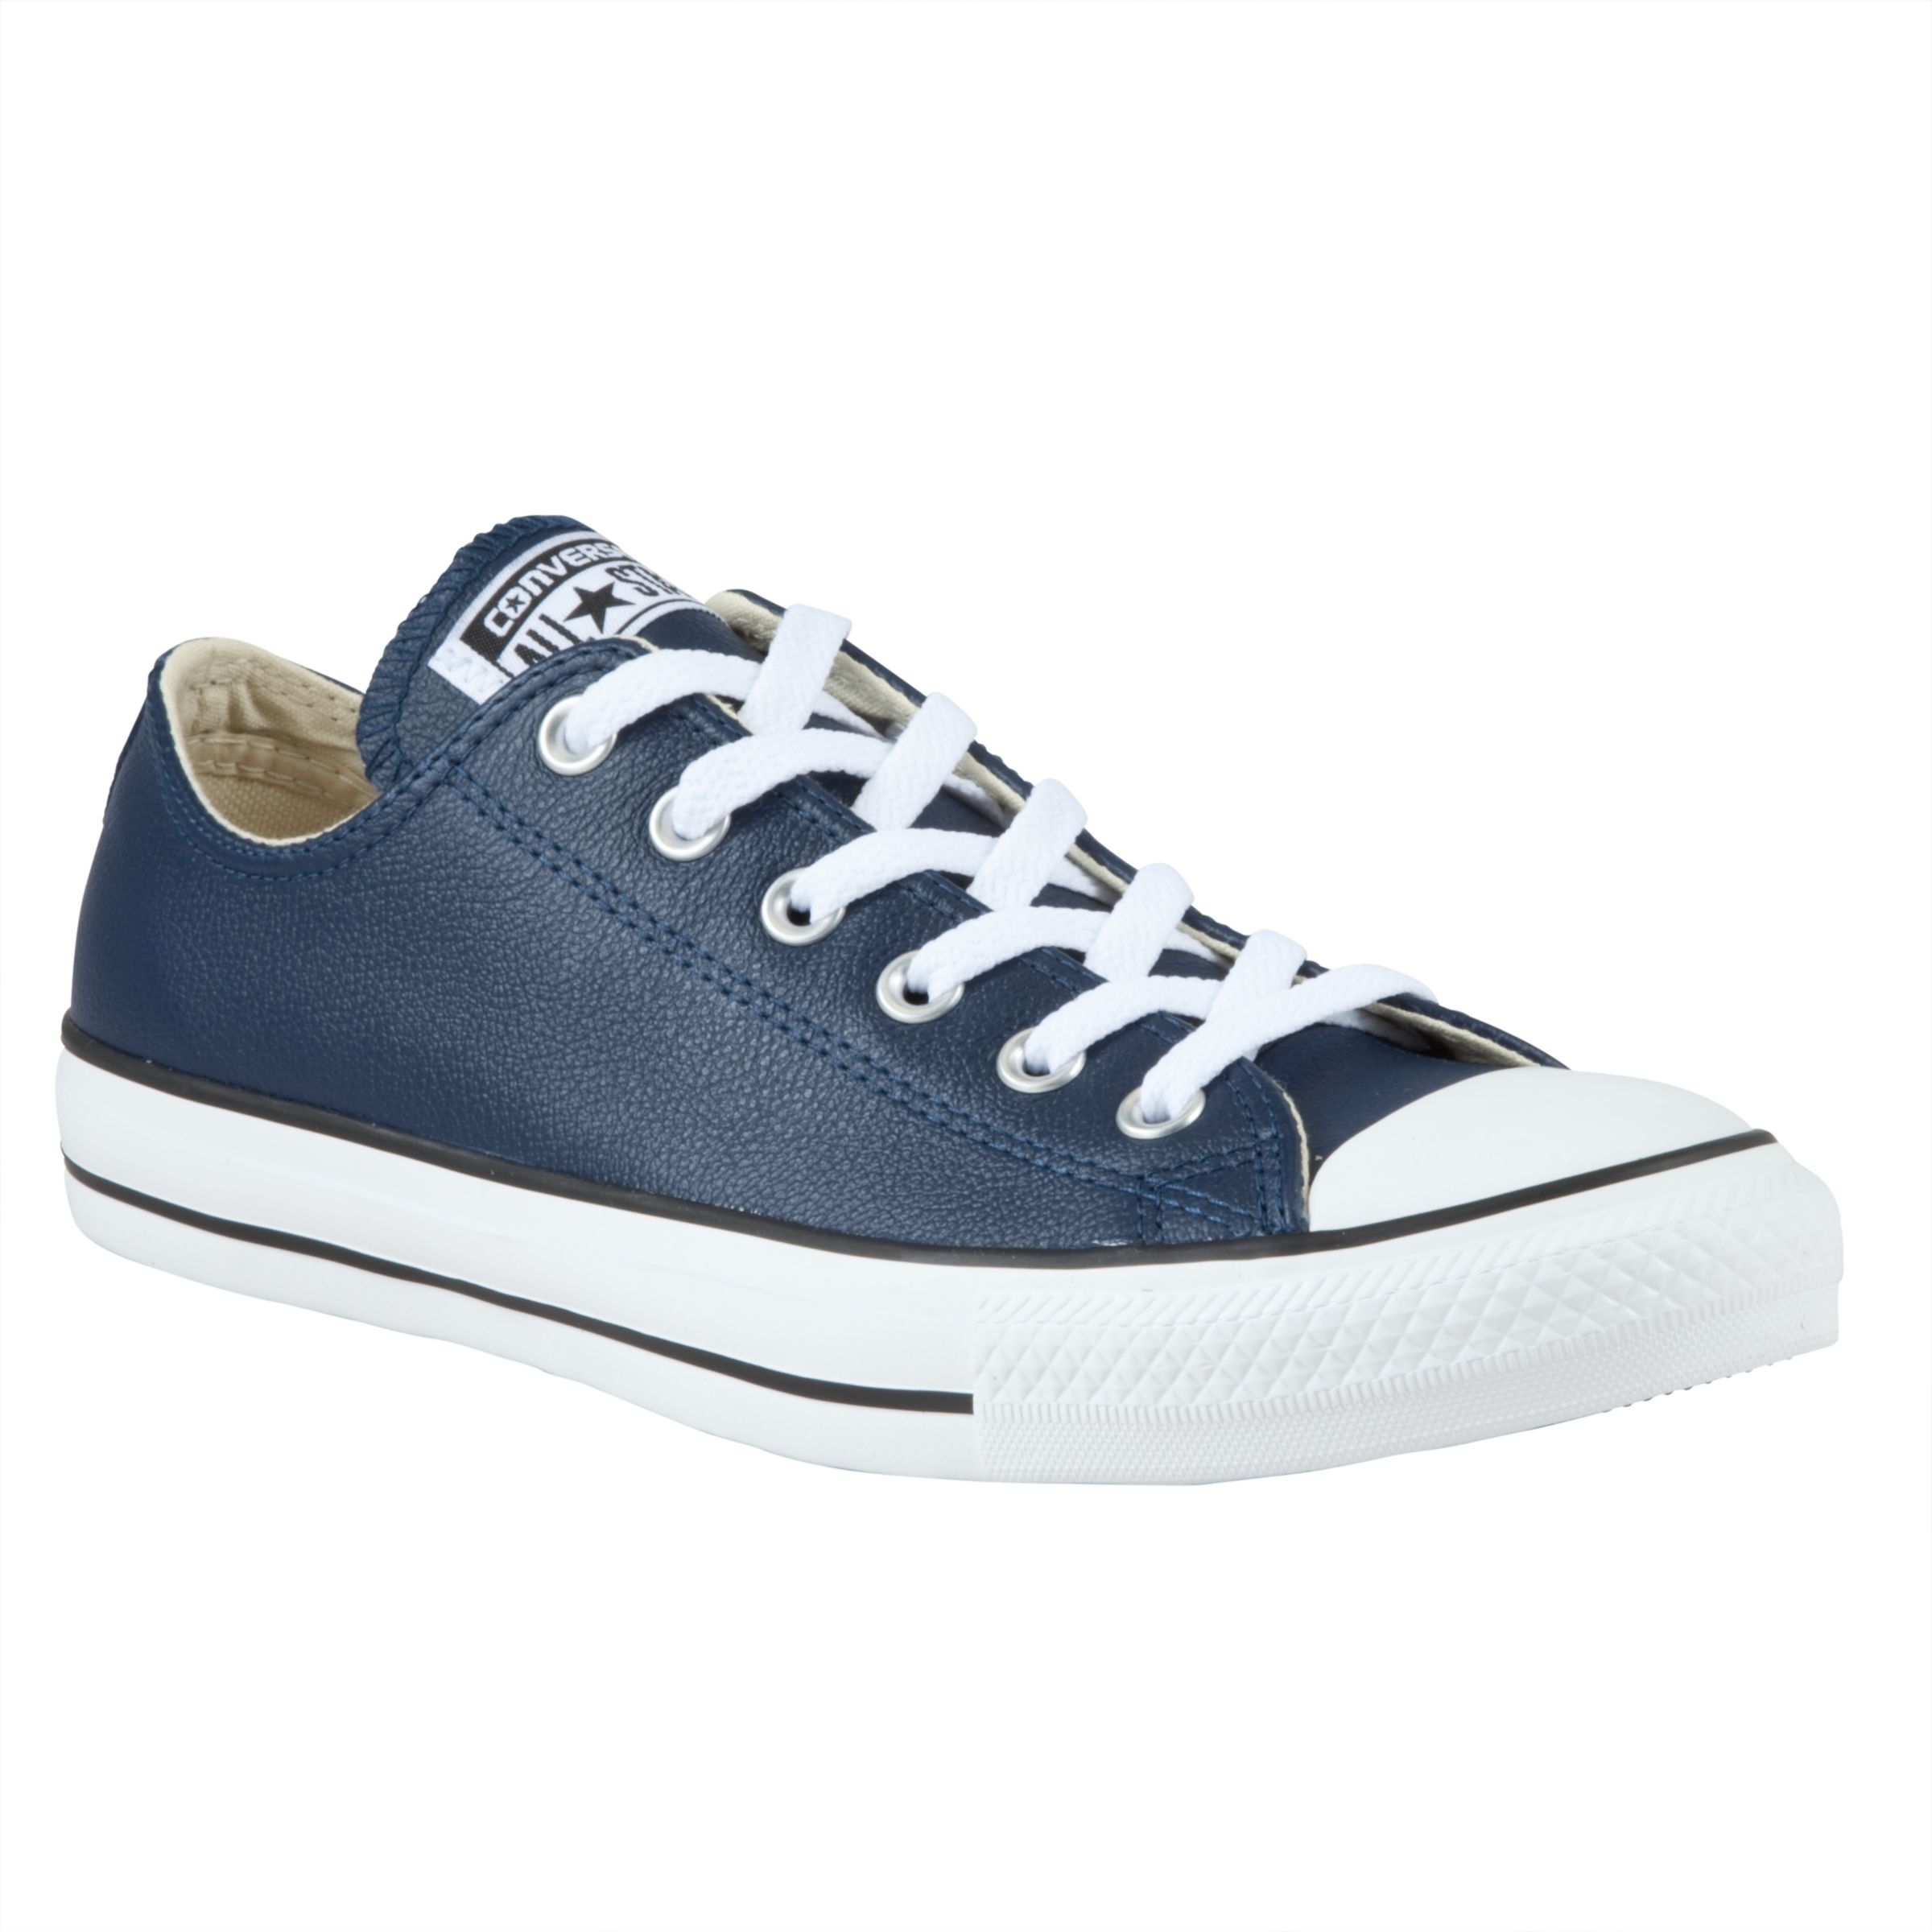 converse all star leather navy